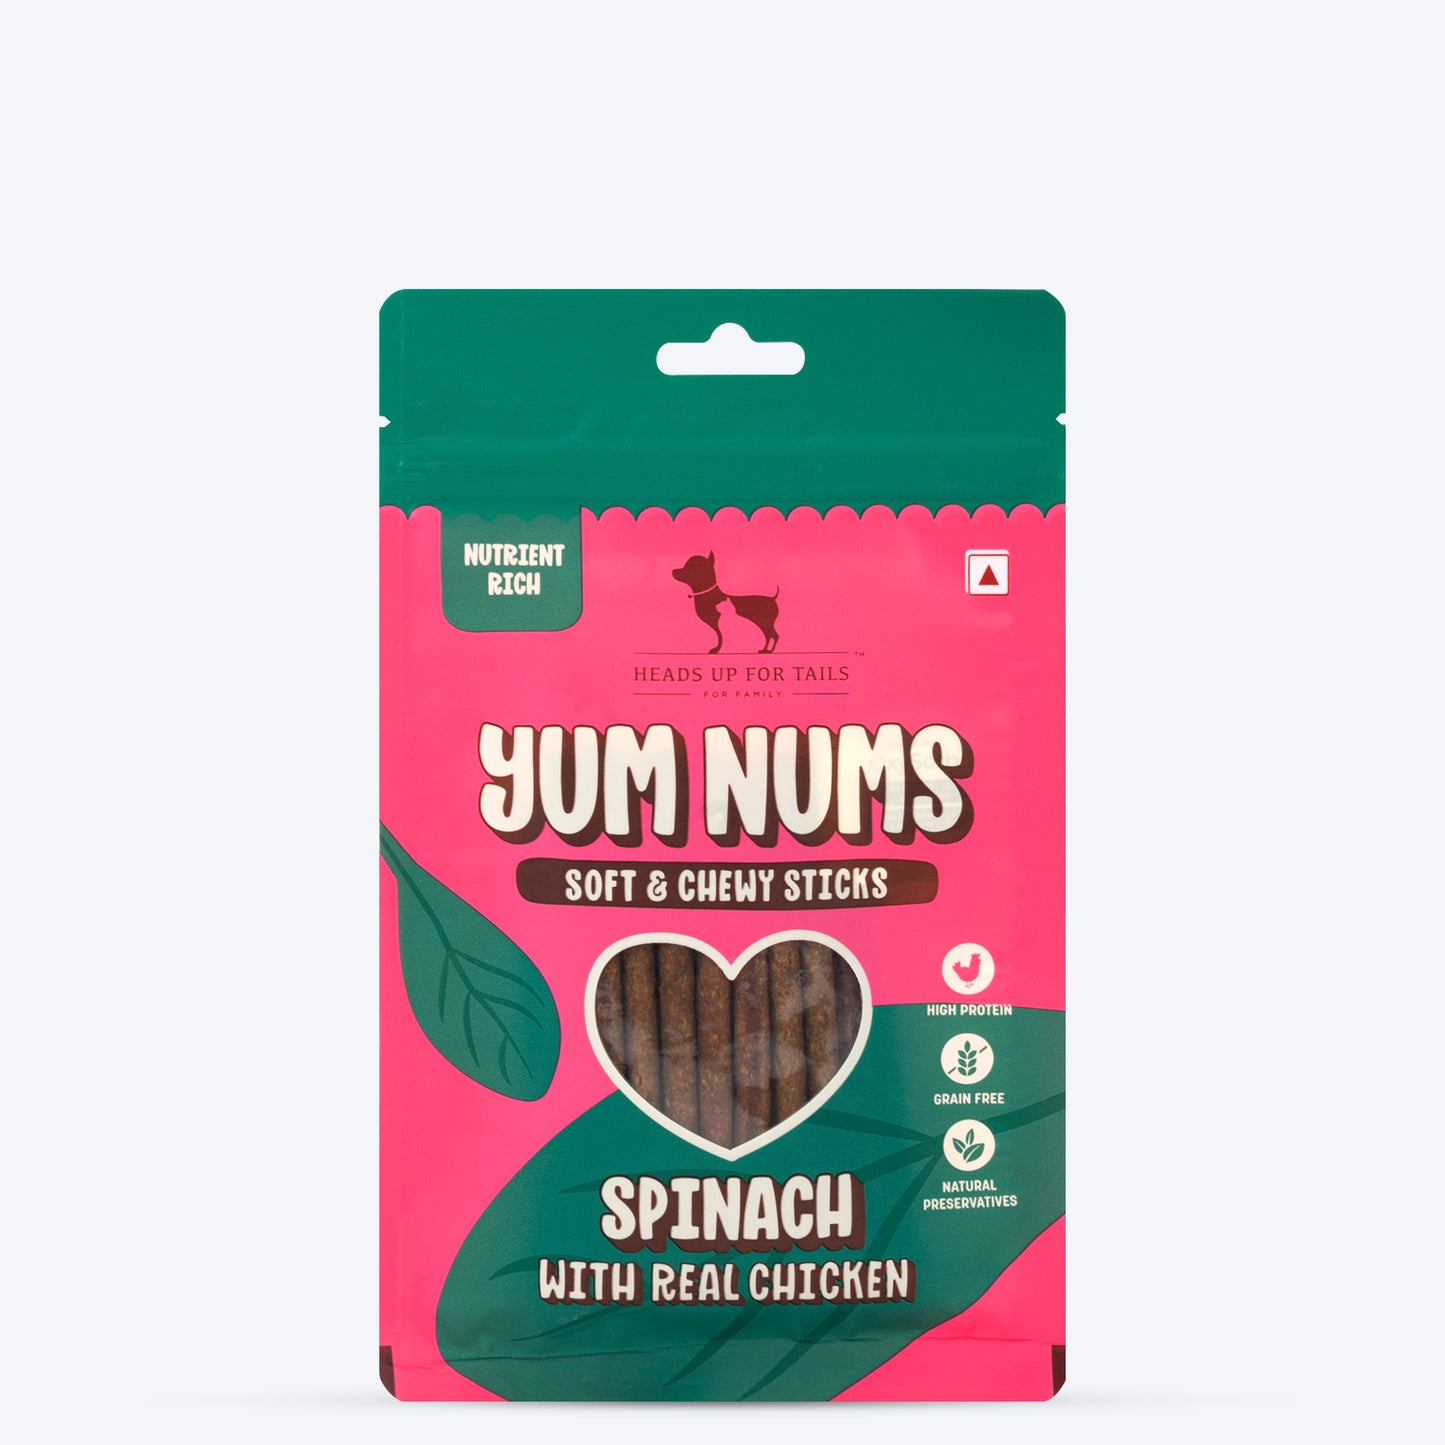 HUFT Yum Nums Soft & Chewy Sticks Spinach With Real Chicken Treat For Dogs - 75 g - Heads Up For Tails